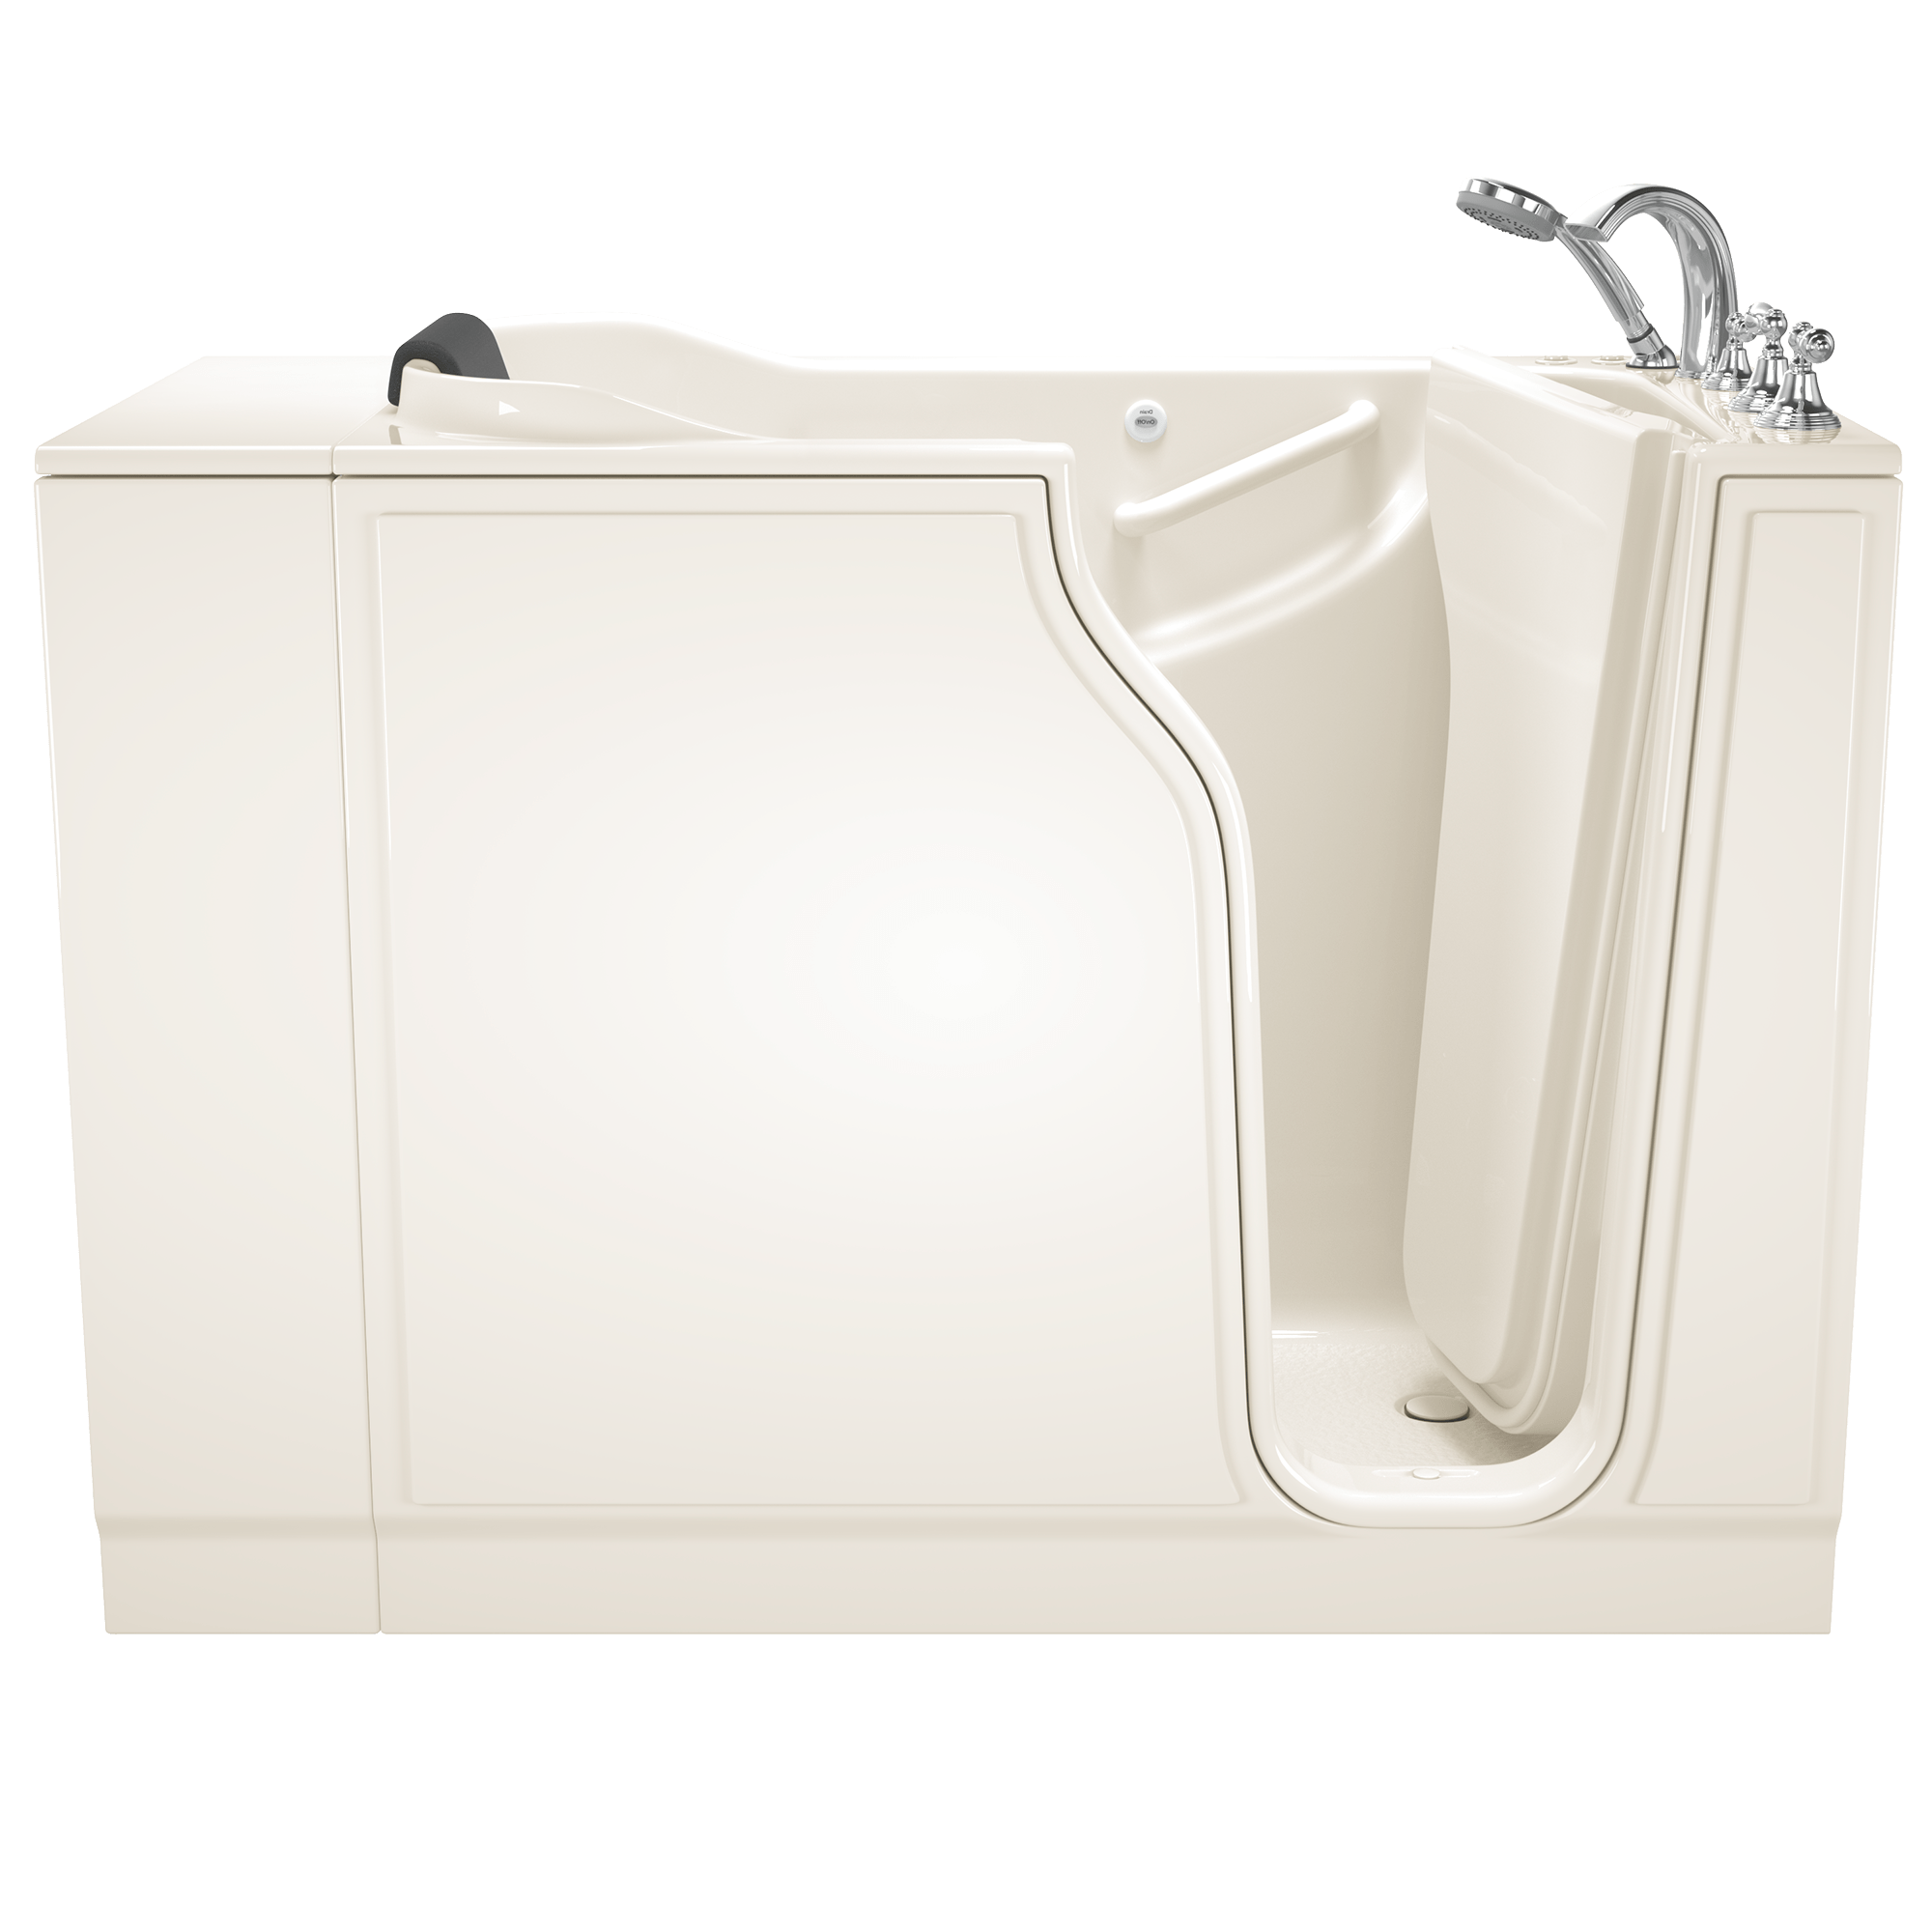 Gelcoat Premium Series 30 x 52 -Inch Walk-in Tub With Combination Air Spa and Whirlpool Systems - Right-Hand Drain With Faucet